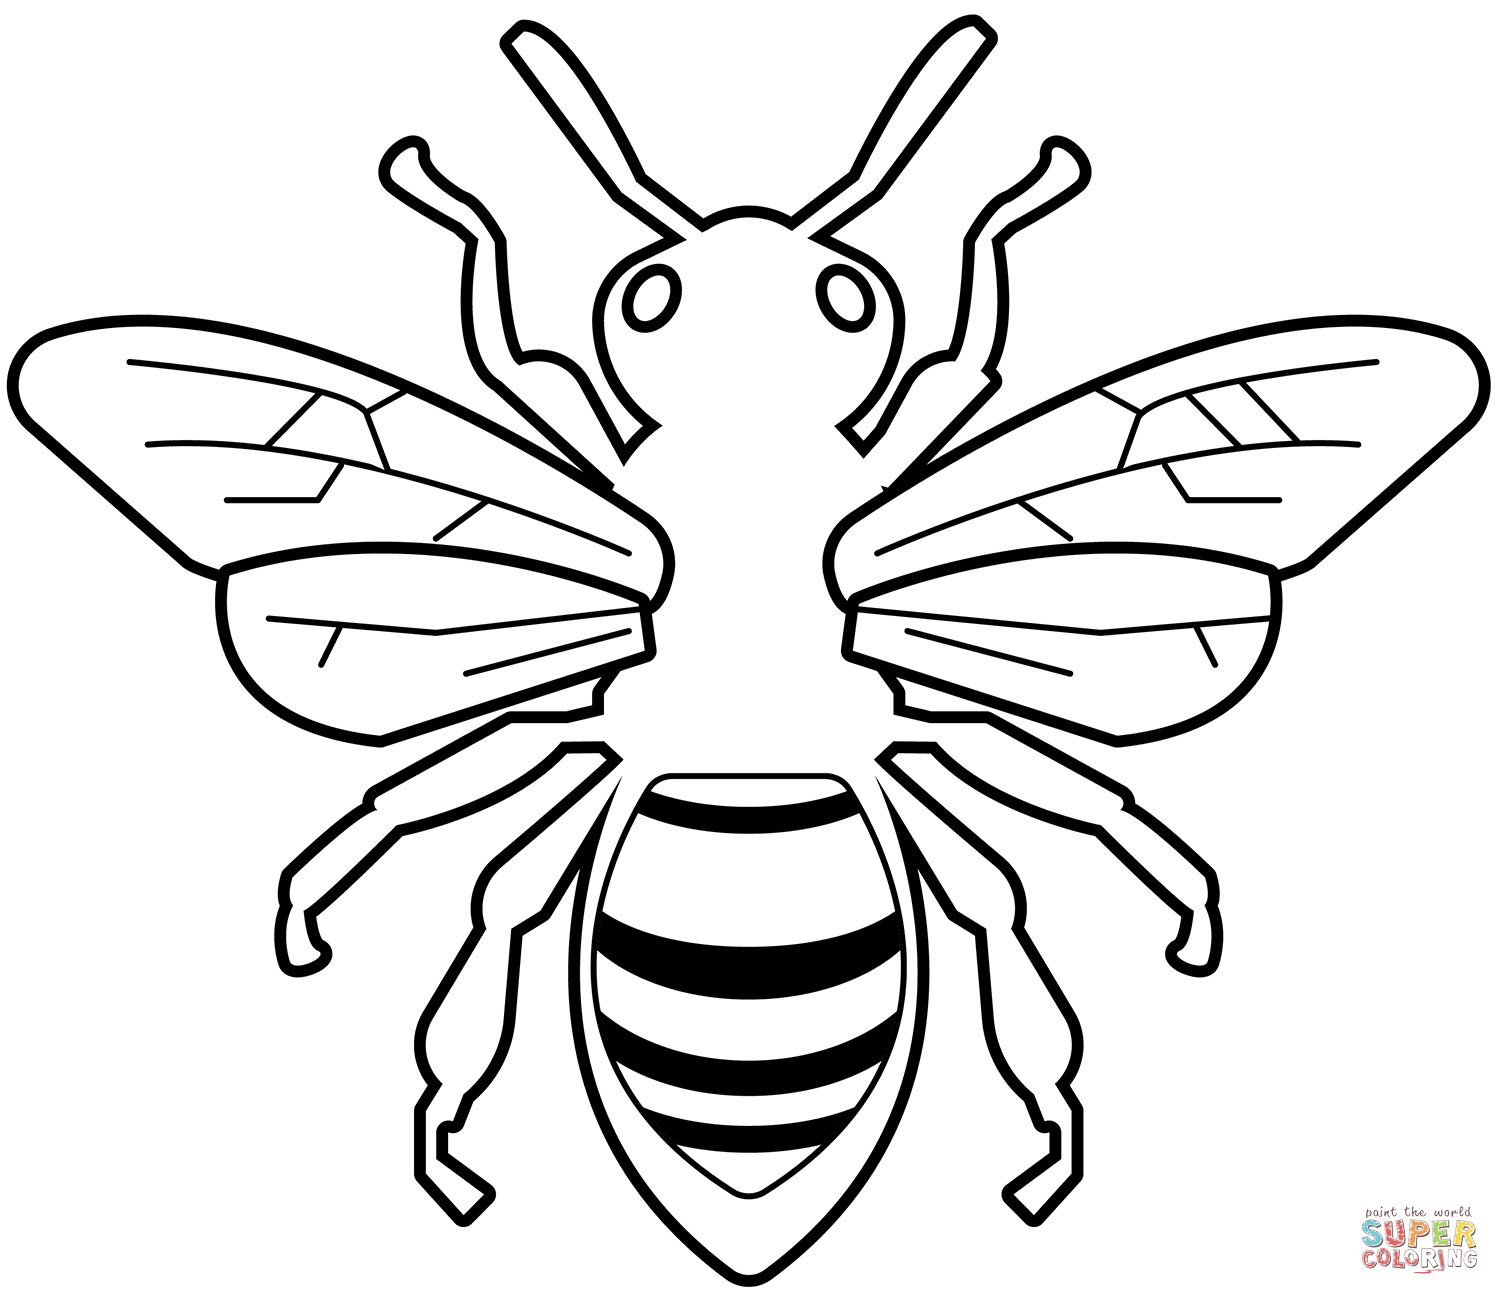 Bee coloring page free printable coloring pages